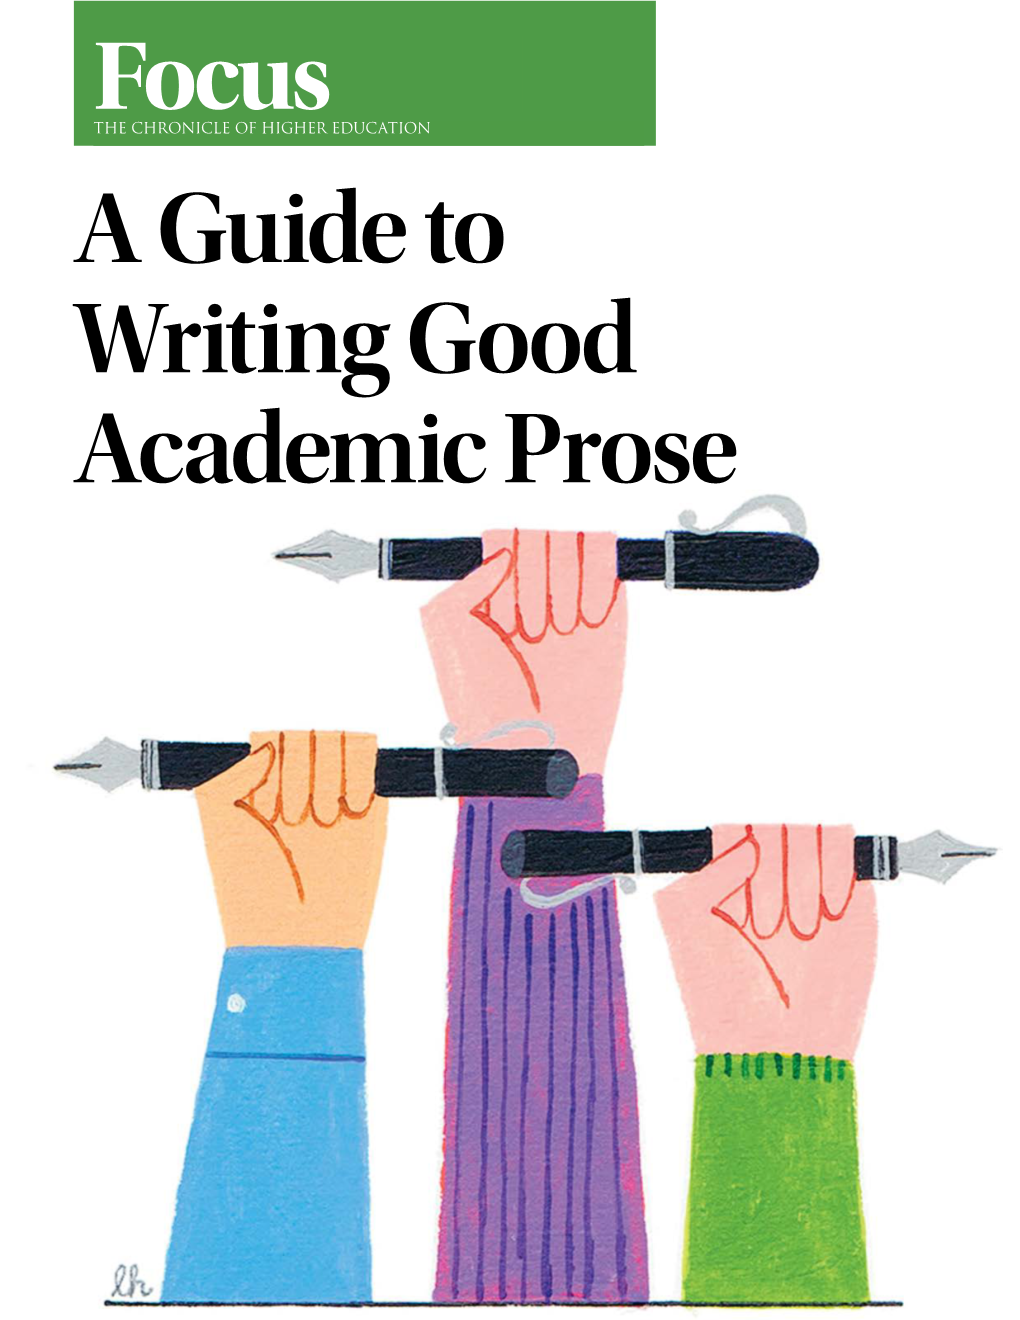 A Guide to Writing Good Academic Prose